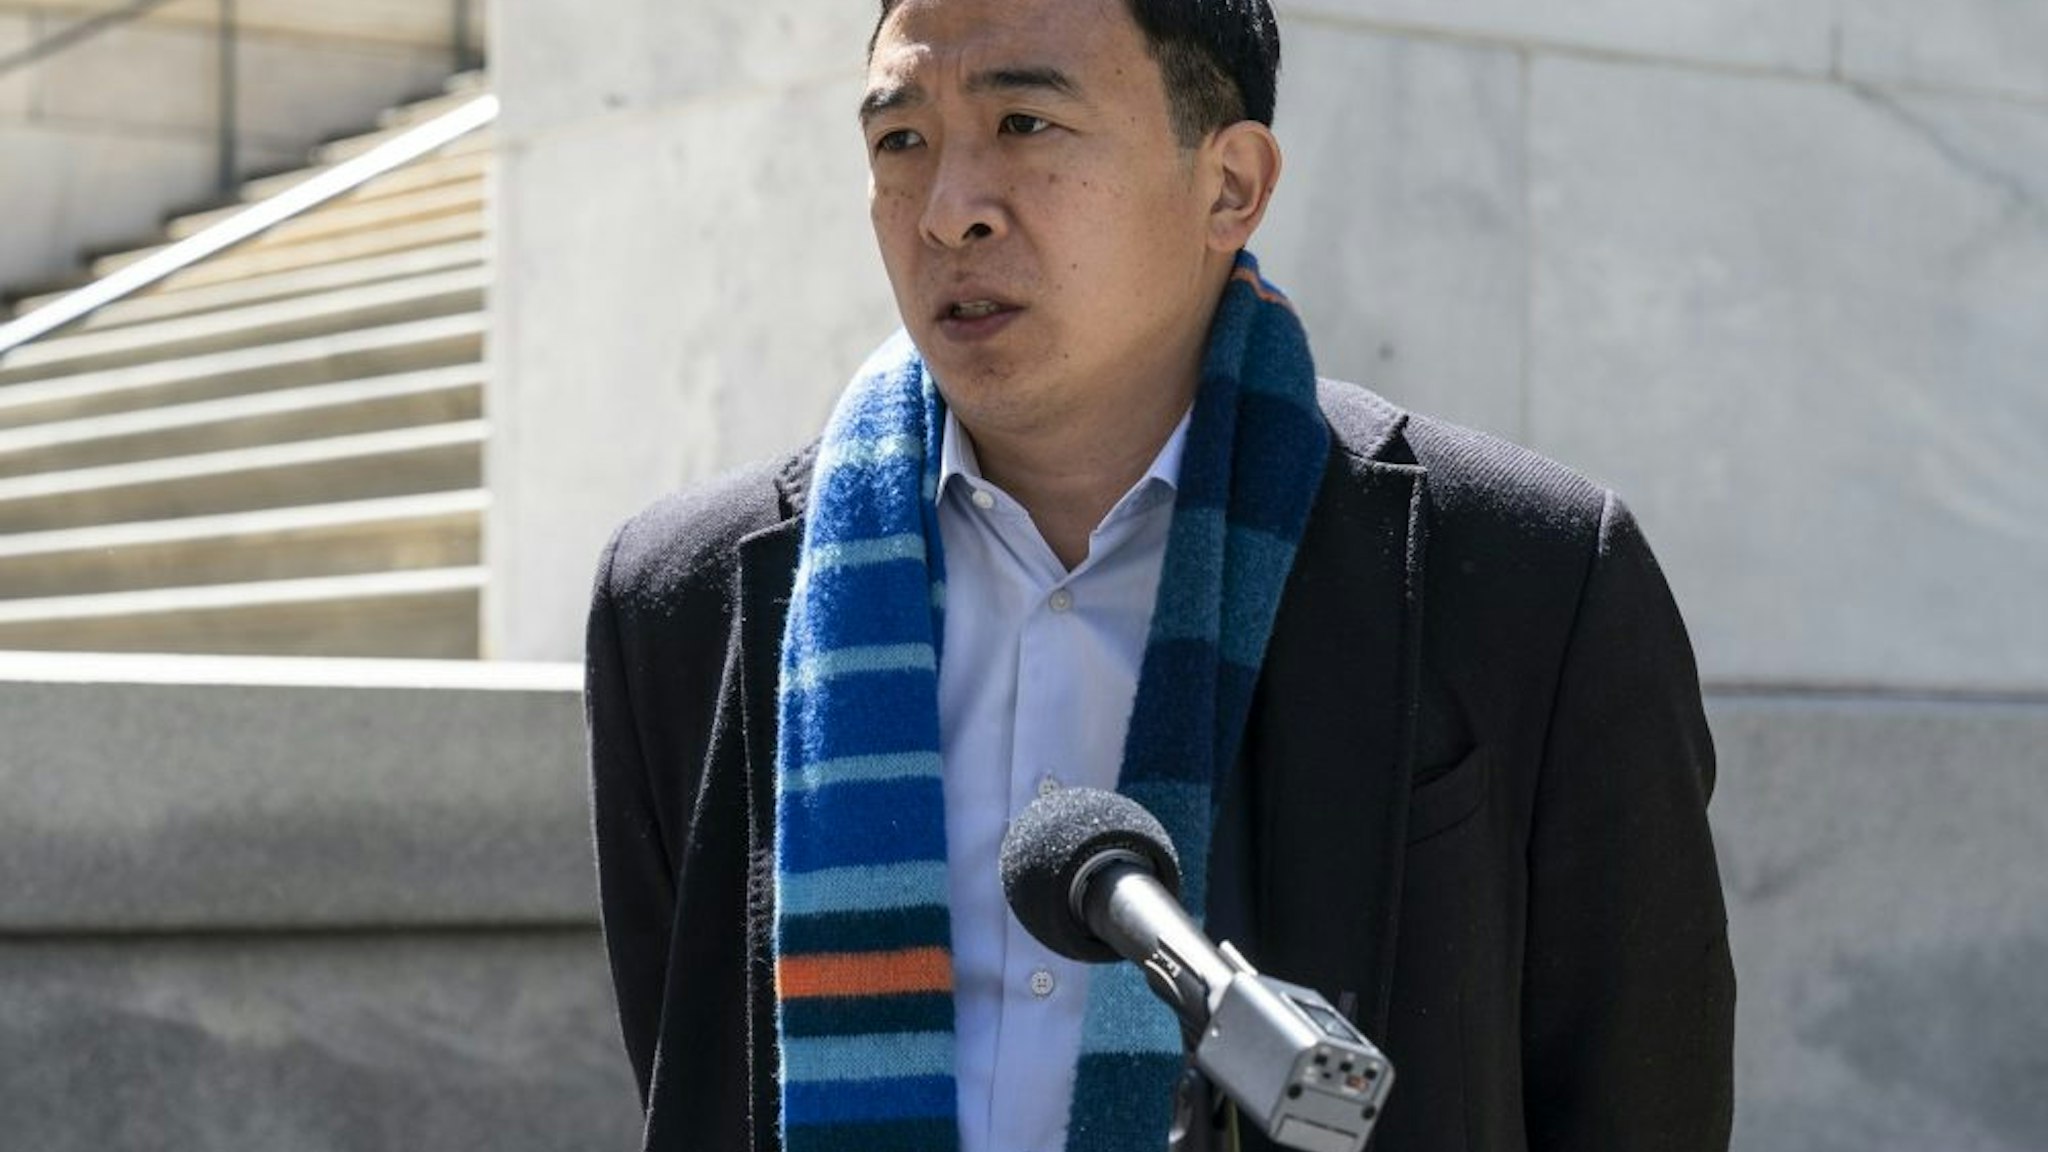 NEW YORK, UNITED STATES - 2021/05/11: Mayoral candidate Andrew Yang holds press conference outside of Tweed Courthouse where the Department of Education is located to demand opening of schools in September for full-time, in-person, with teachers in the classroom for all students.